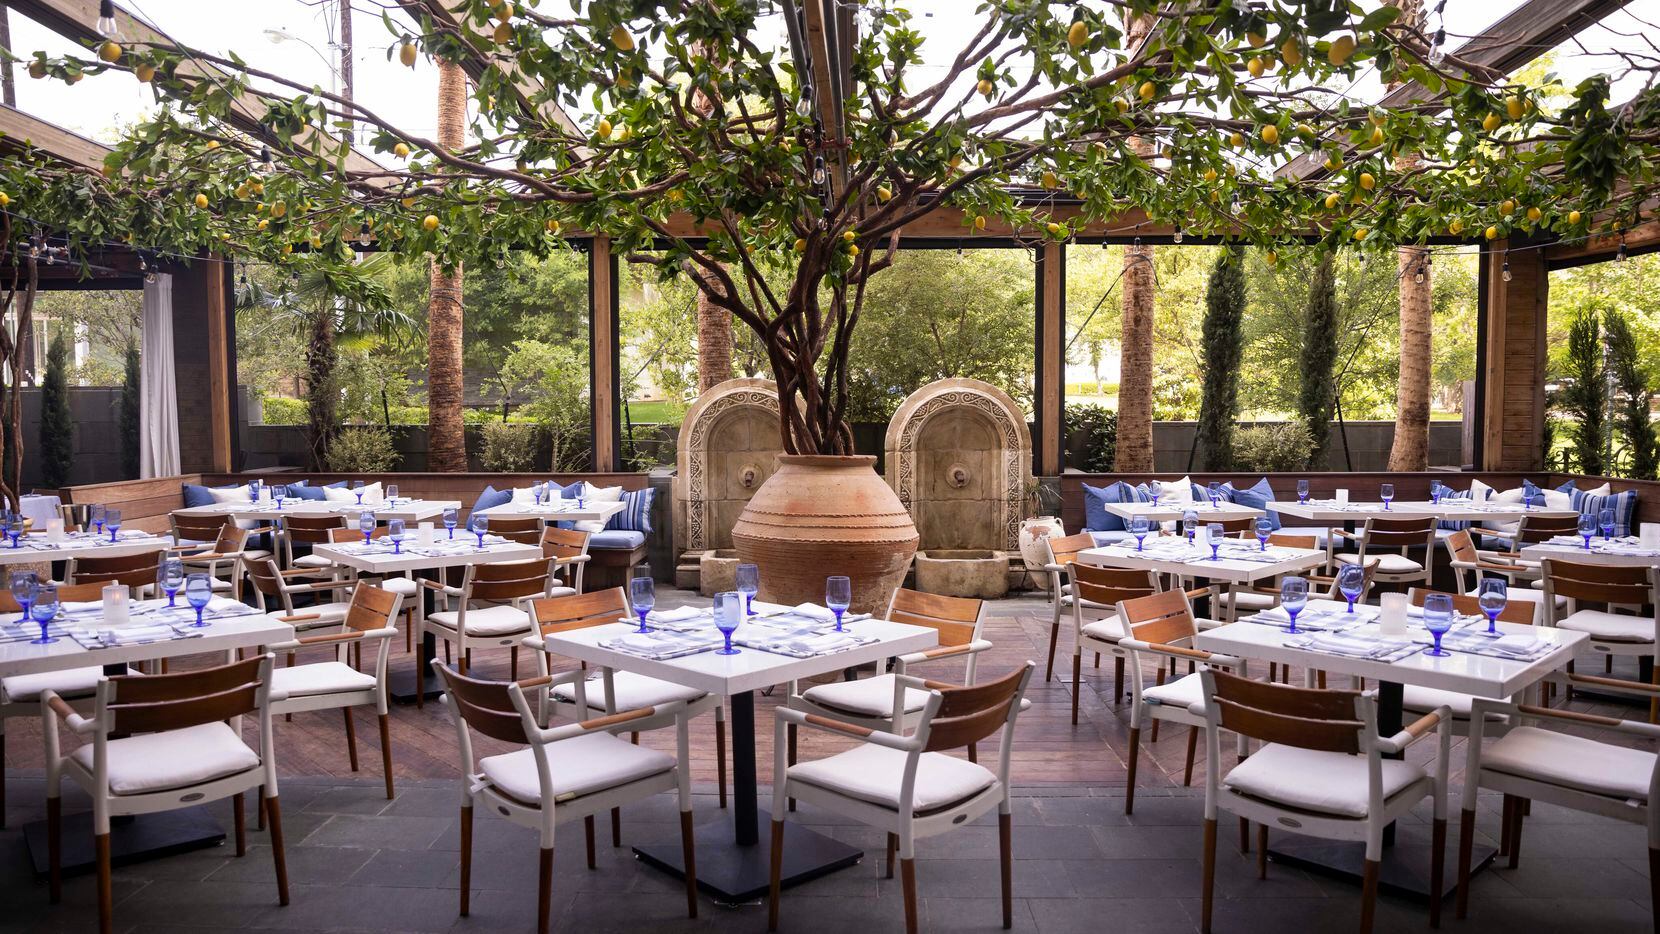 Dolce Riviera and its lovely patio are back — finally. As diners sip Italian wines and...